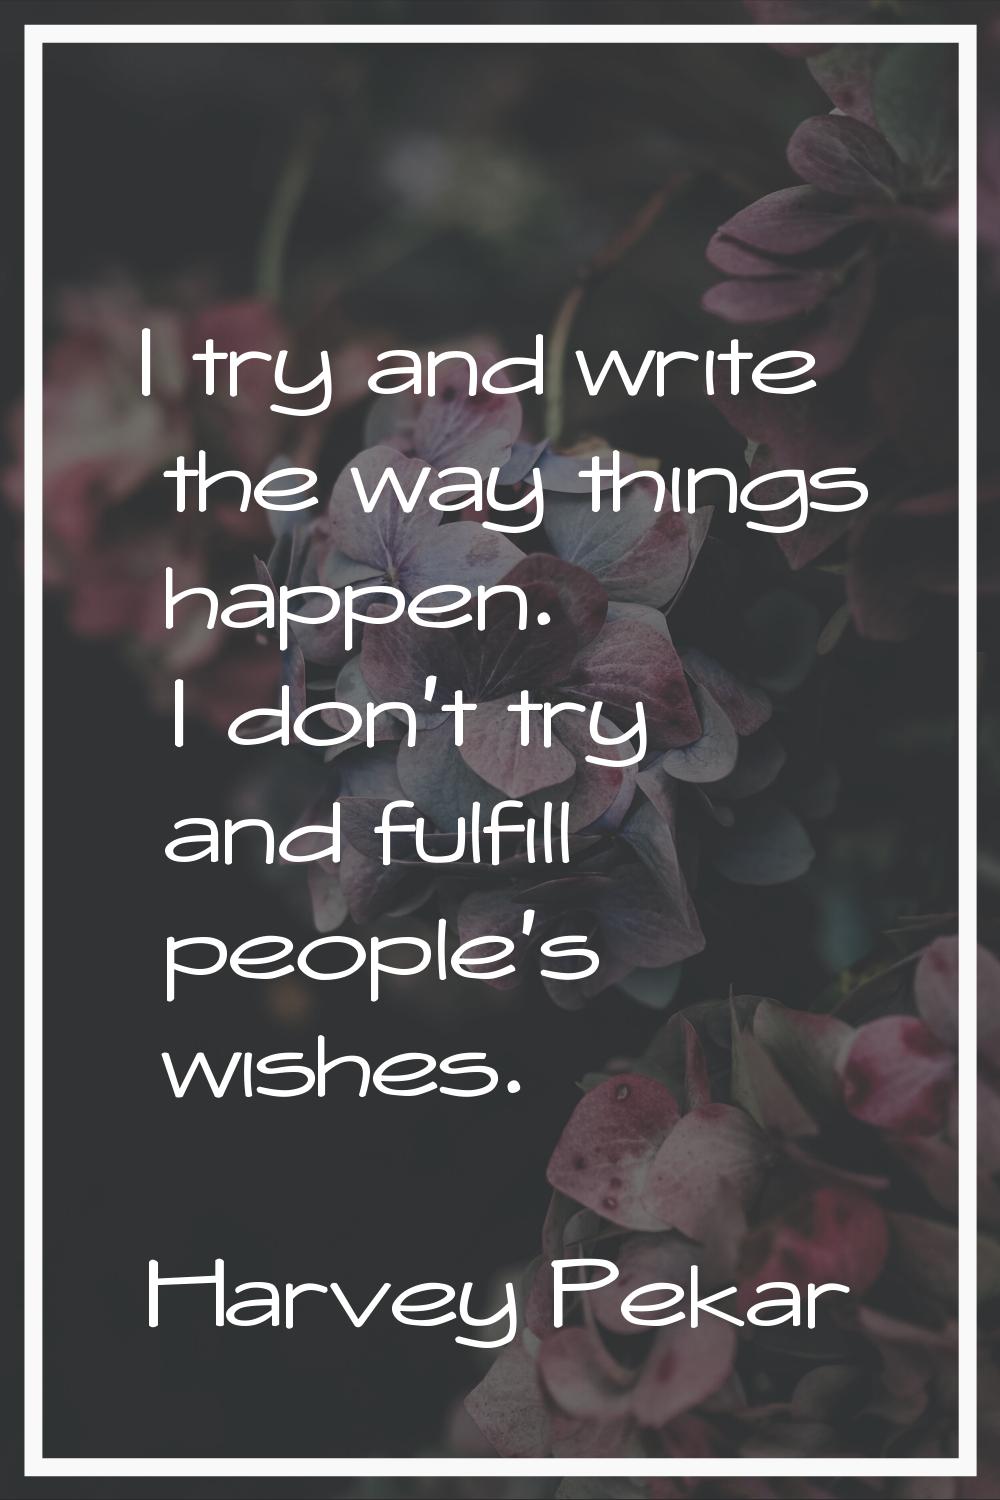 I try and write the way things happen. I don't try and fulfill people's wishes.